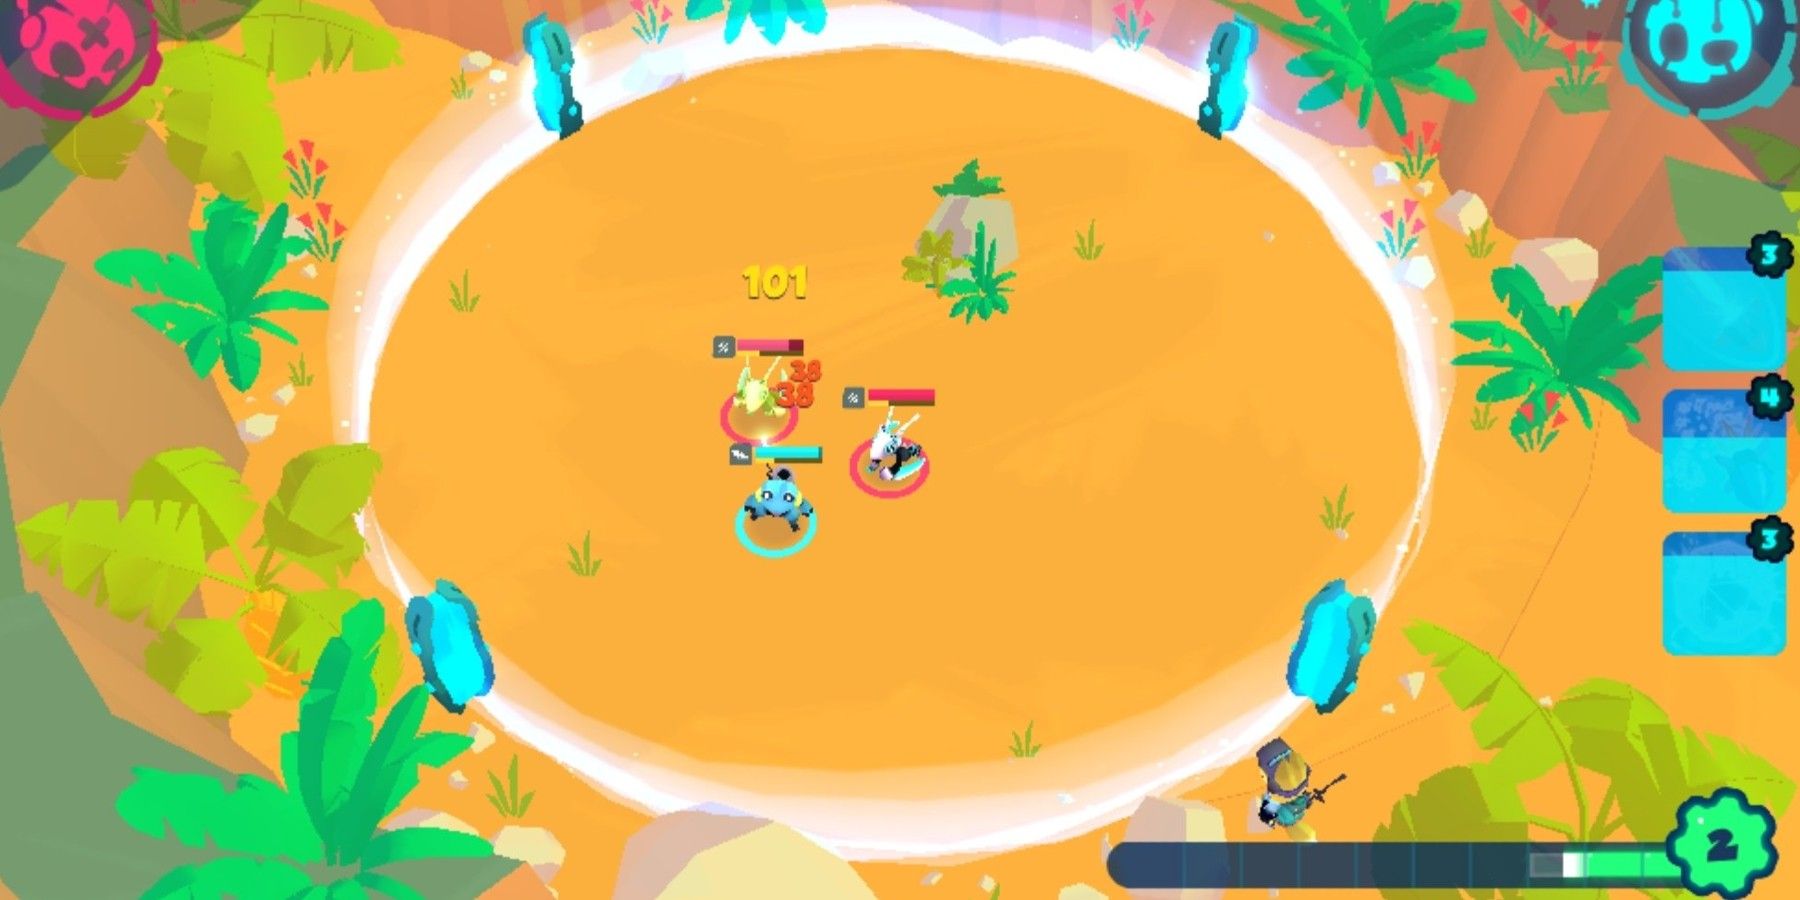 Botworld Adventure multiplayer fight in circle battle arena